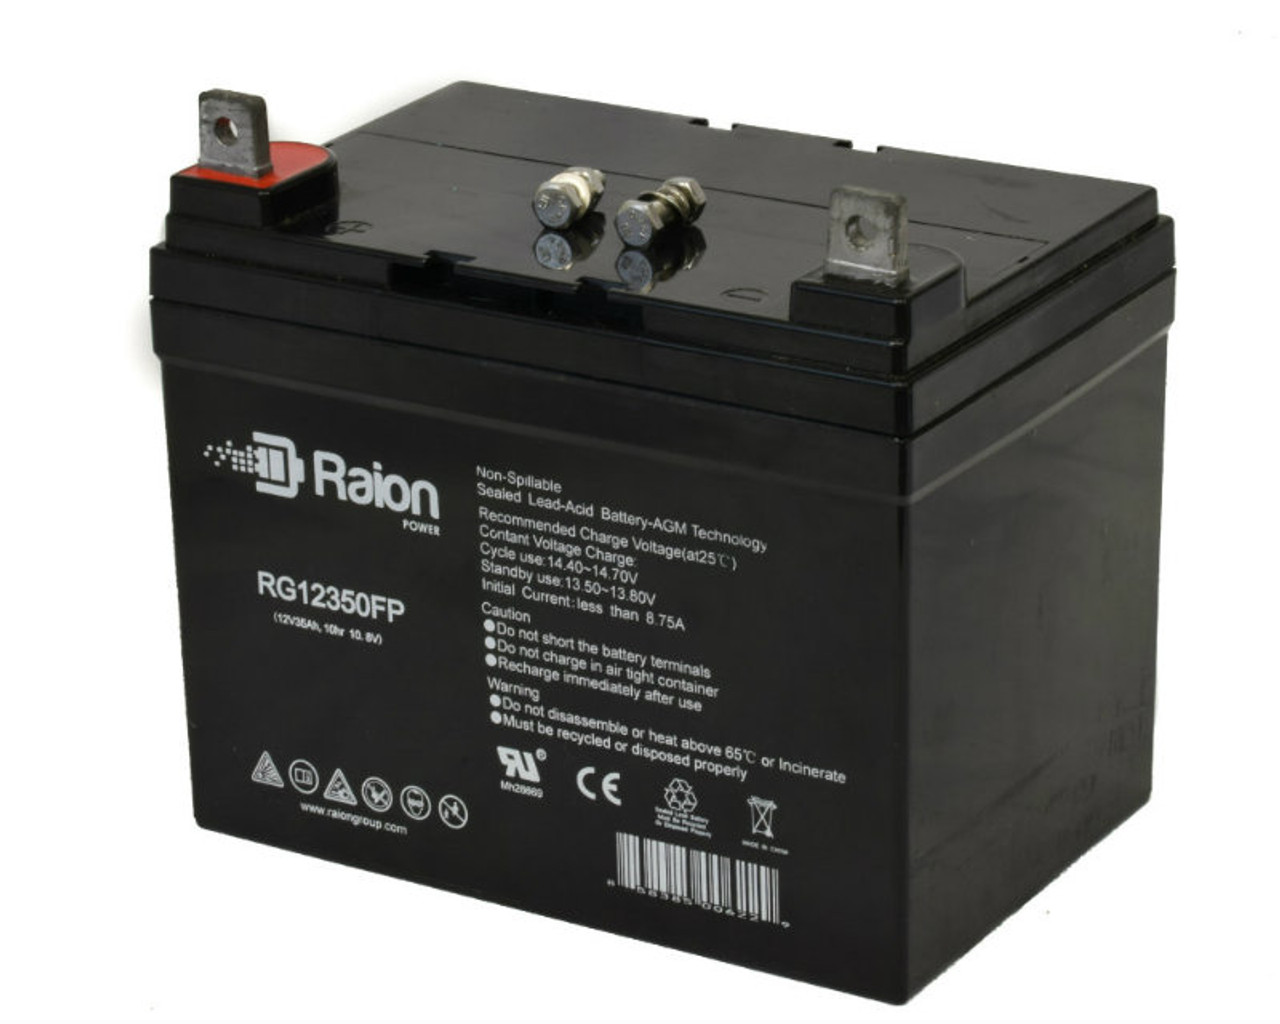 Raion Power Replacement 12V 35Ah Battery for Pro Rider 6FM33 - 1 Pack